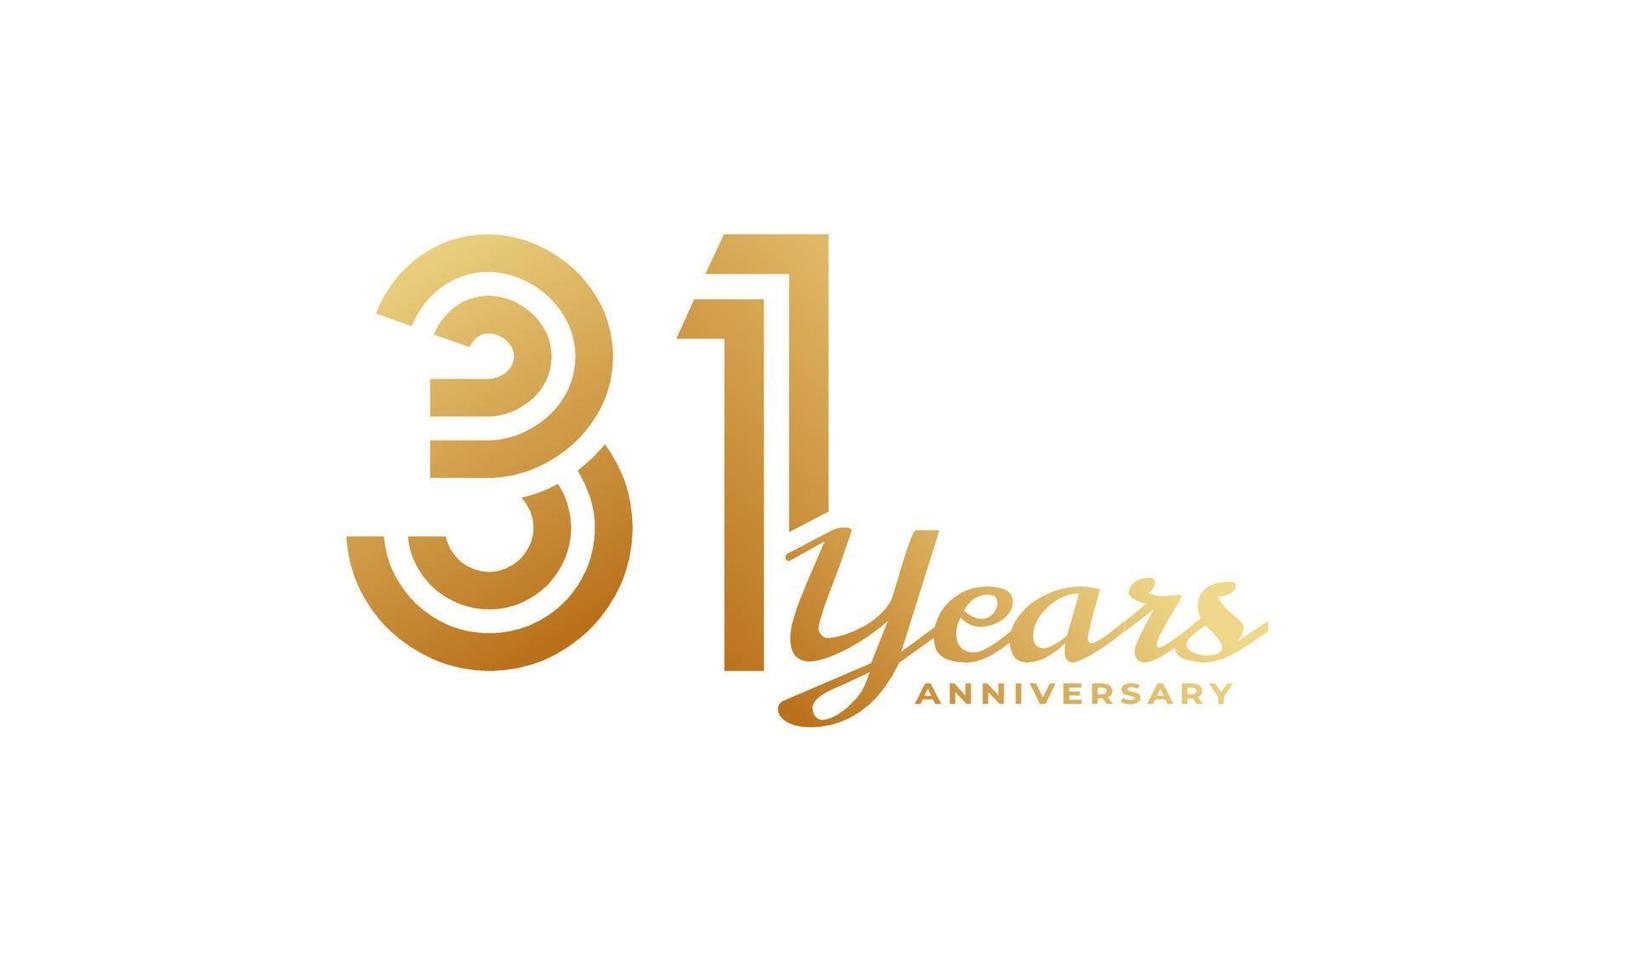 31 Year Anniversary Celebration with Handwriting Golden Color for Celebration Event, Wedding, Greeting card, and Invitation Isolated on White Background vector